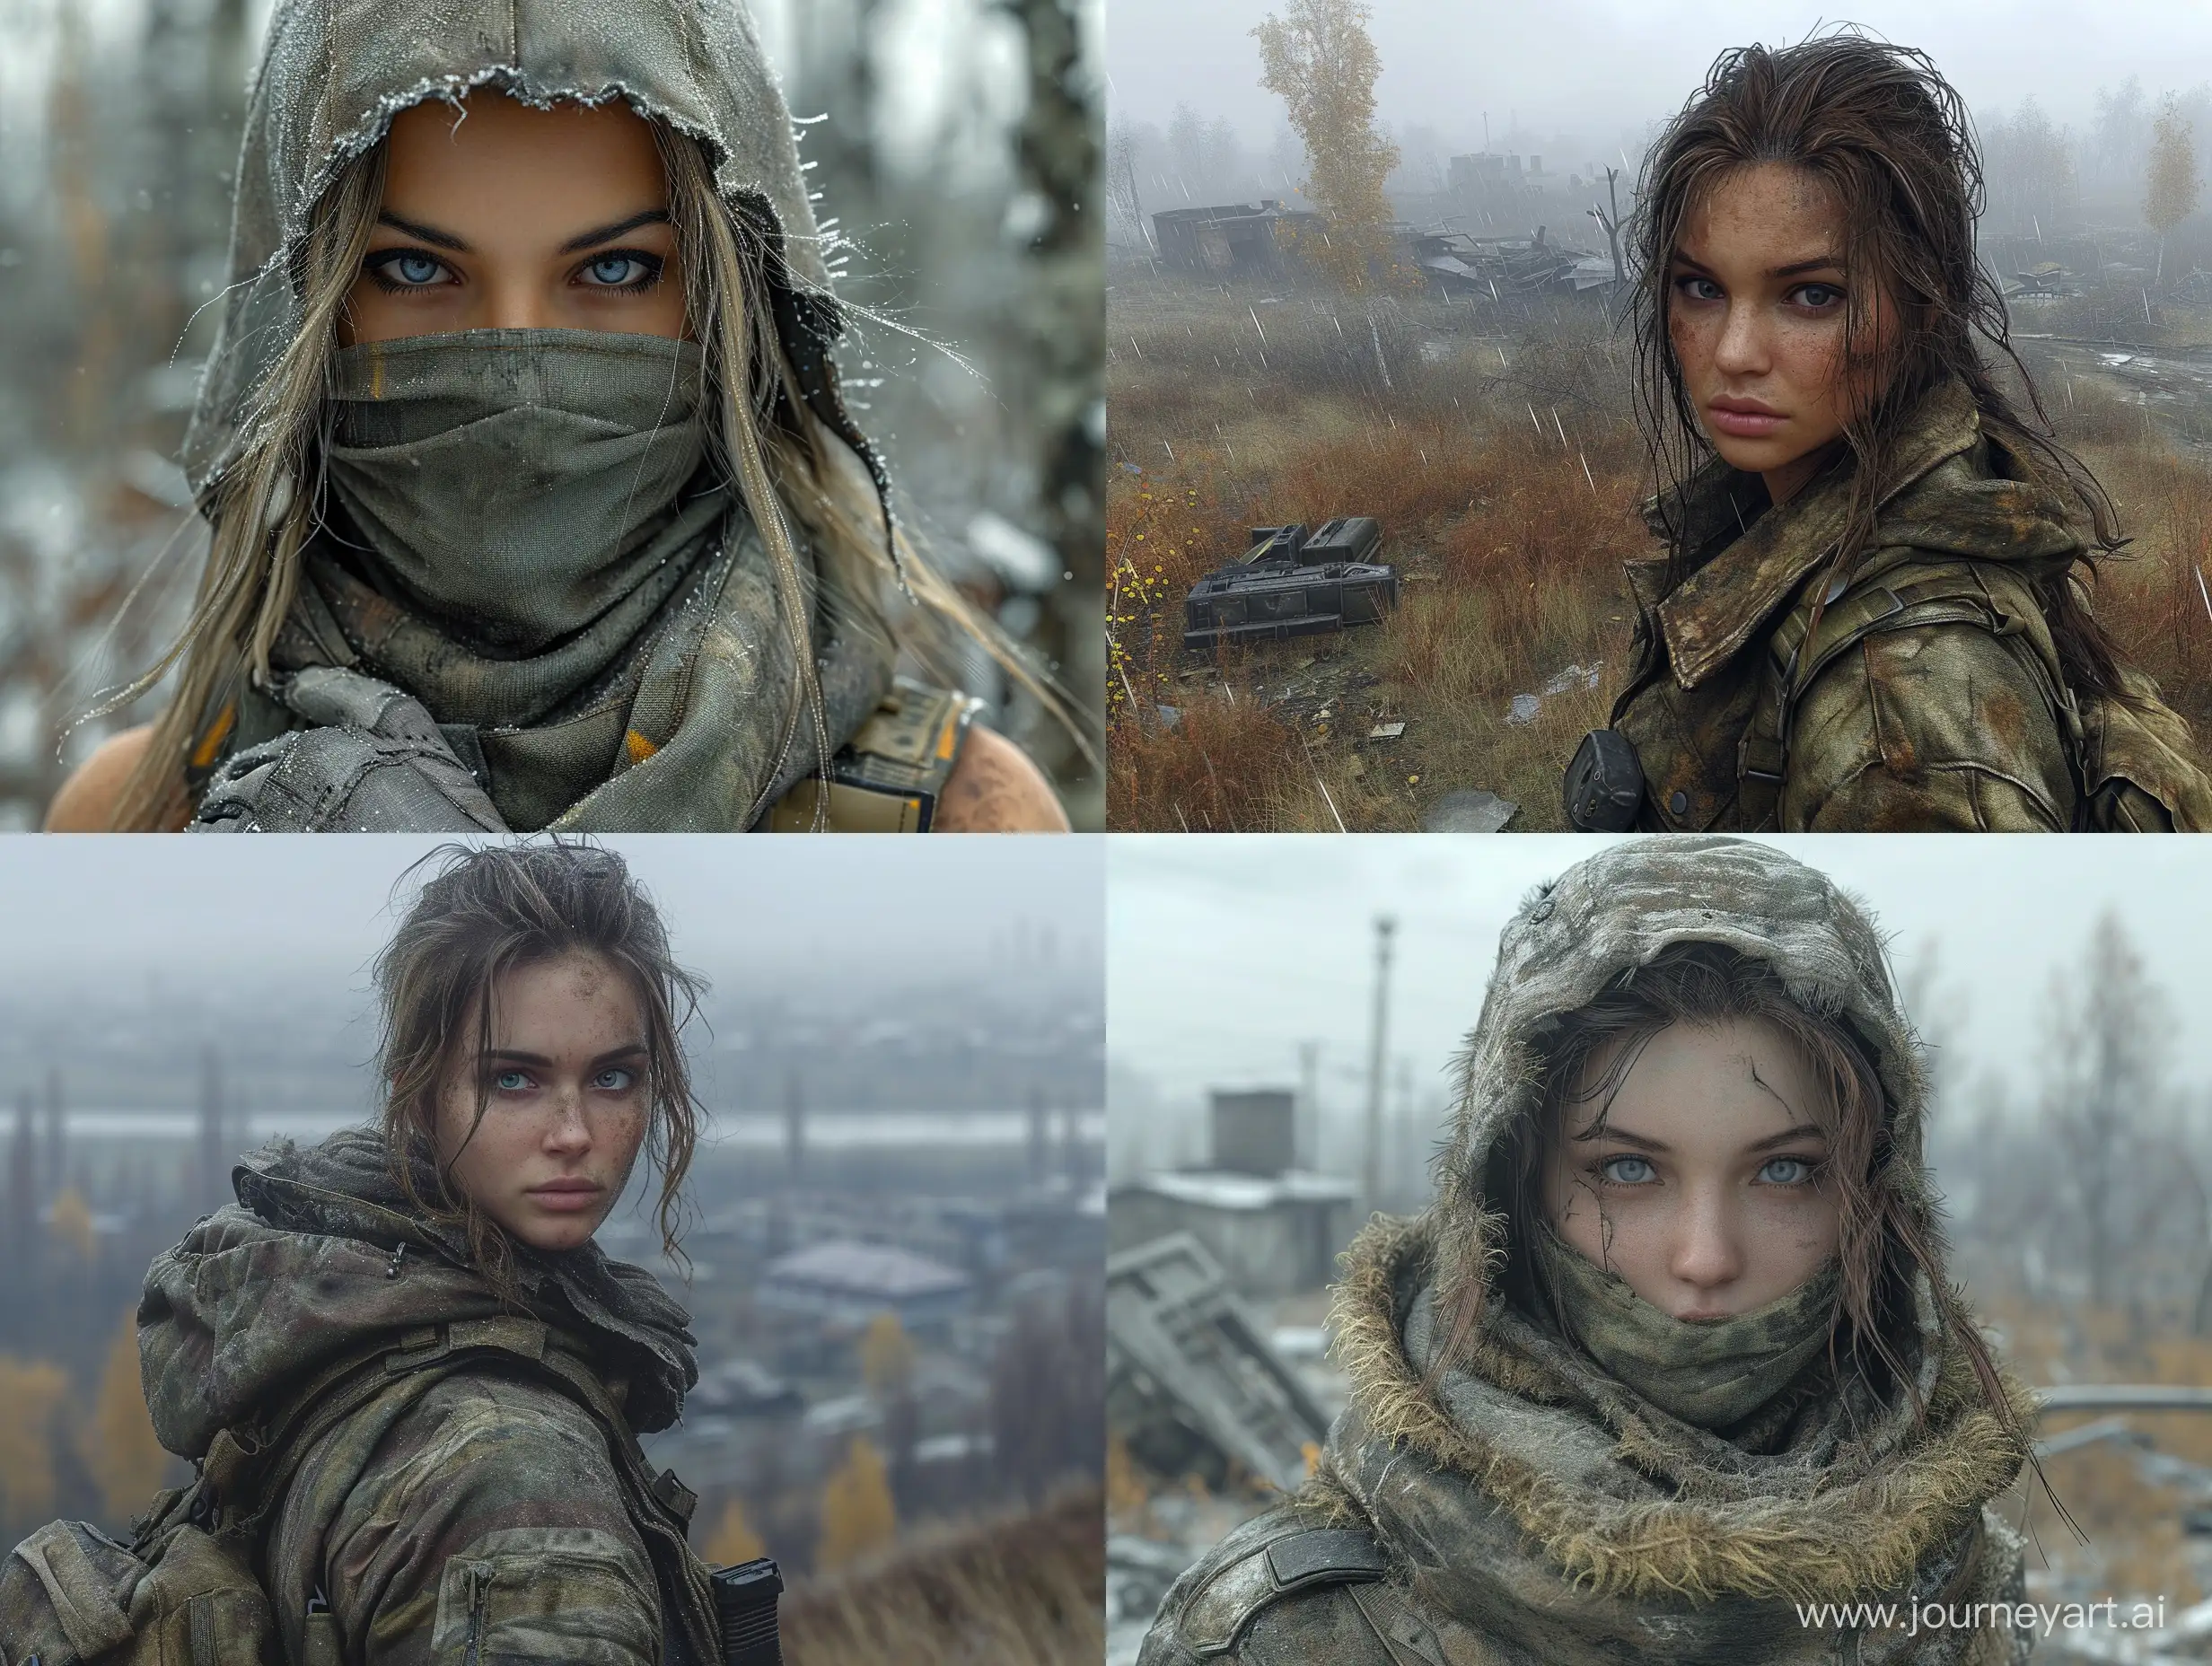 Female-Mercenary-in-STALKER-Tactical-Gear-Amidst-Dead-City-and-Trees